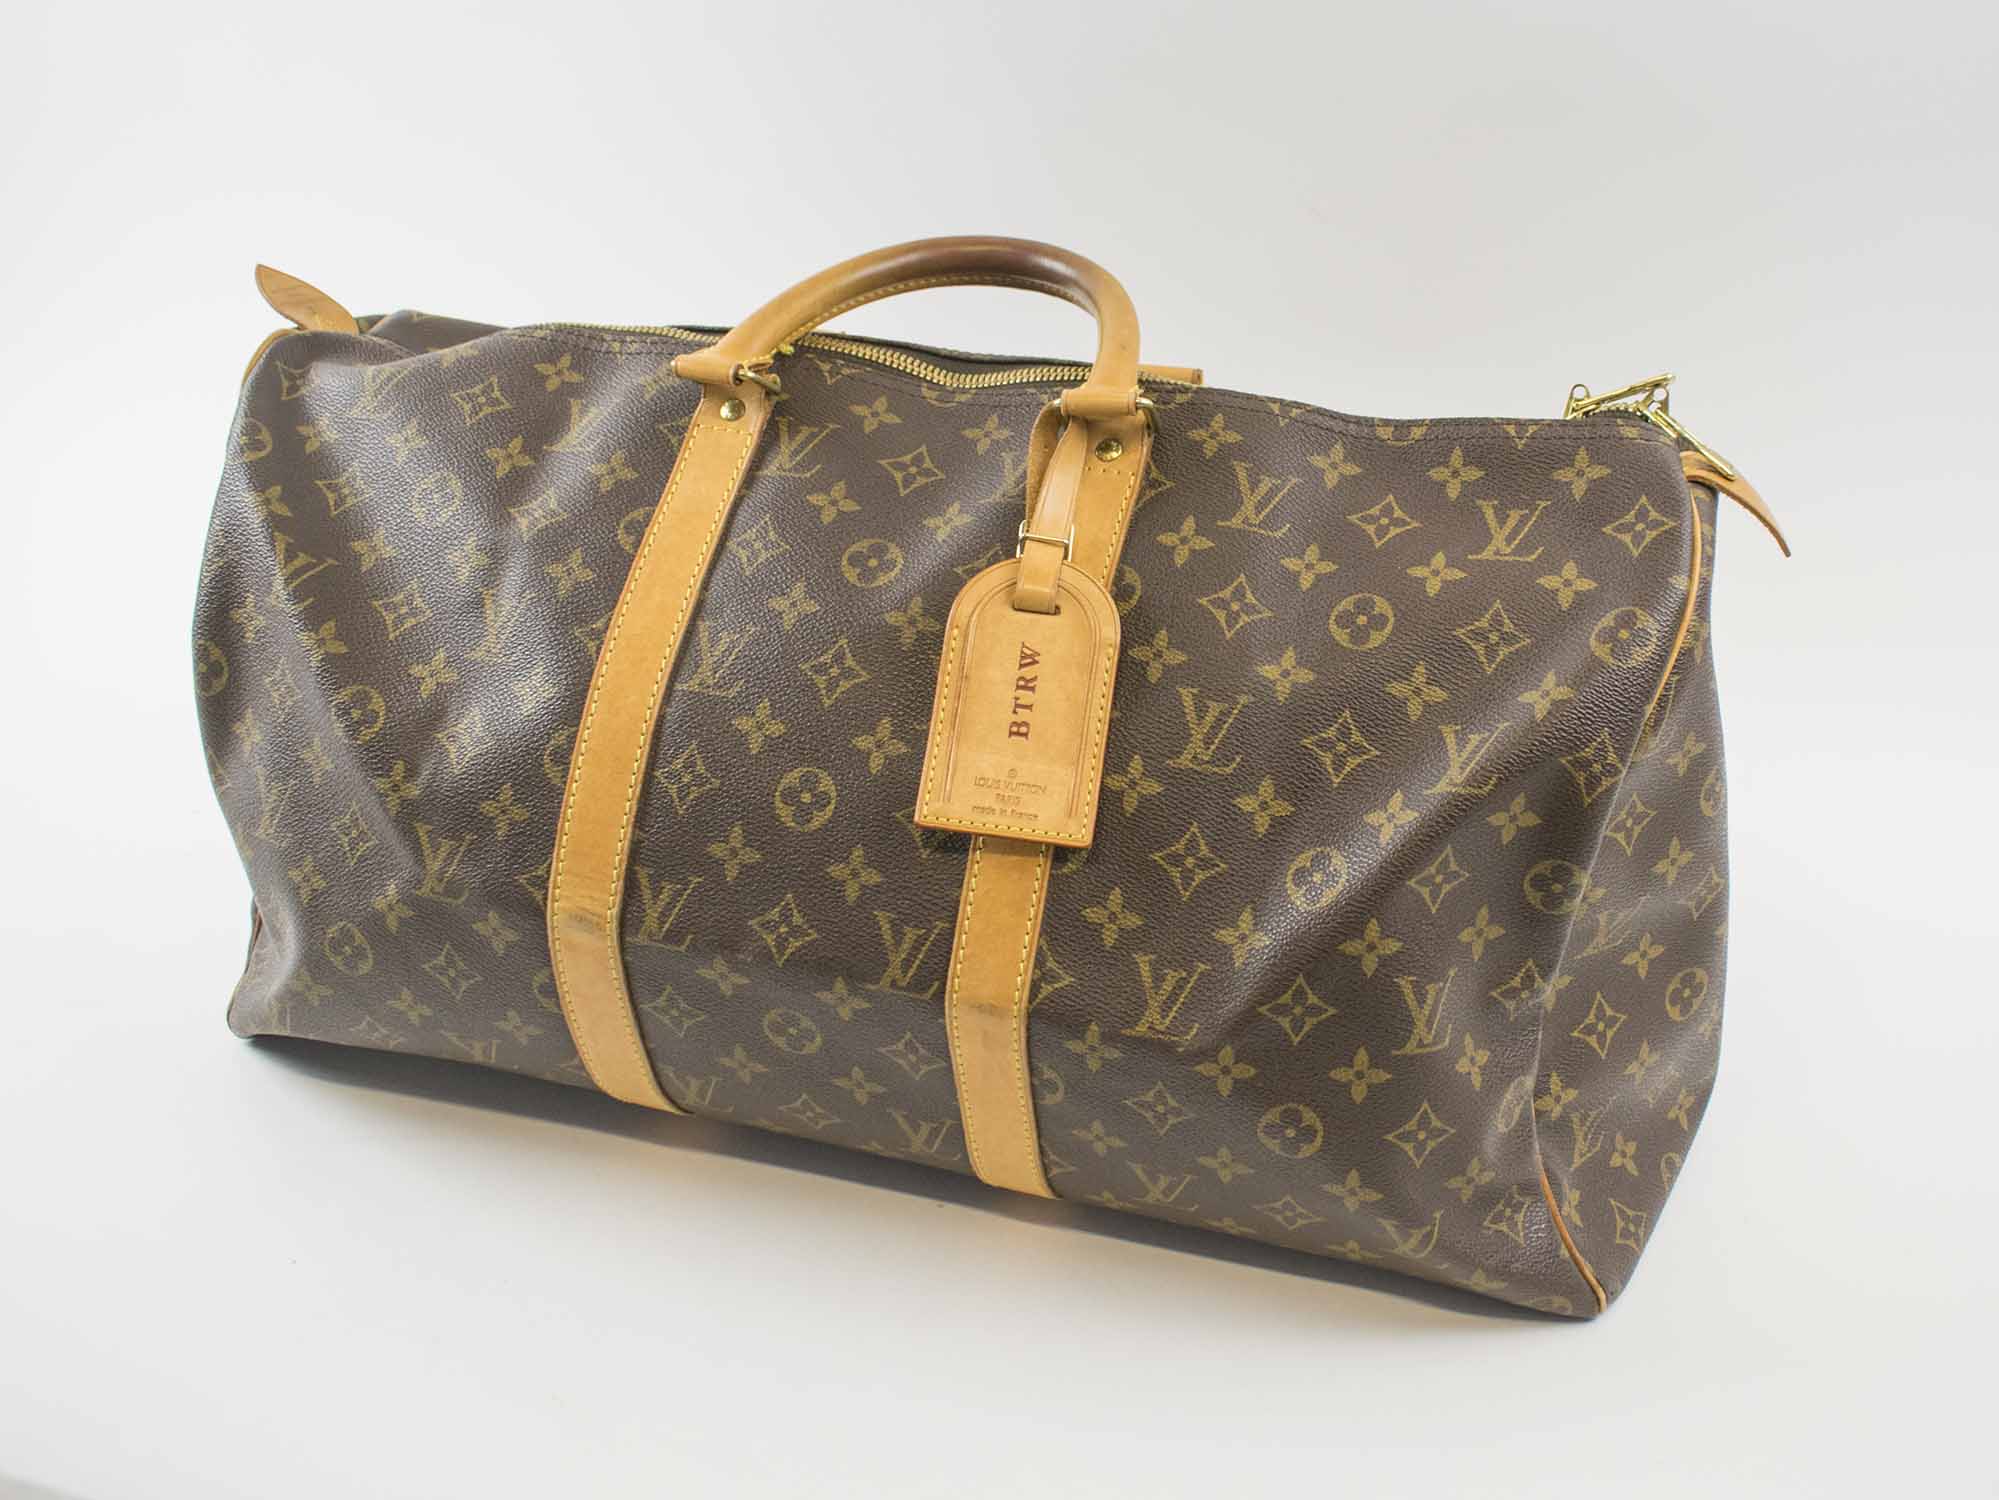 LOUIS VUITTON KEEPALL 50 TRAVEL BAG, monogram canvas with full top double  zip closure, two top handles with leather trims and leather tag with  B.T.R.W. initials, 50cm x 27cm x 22cm.